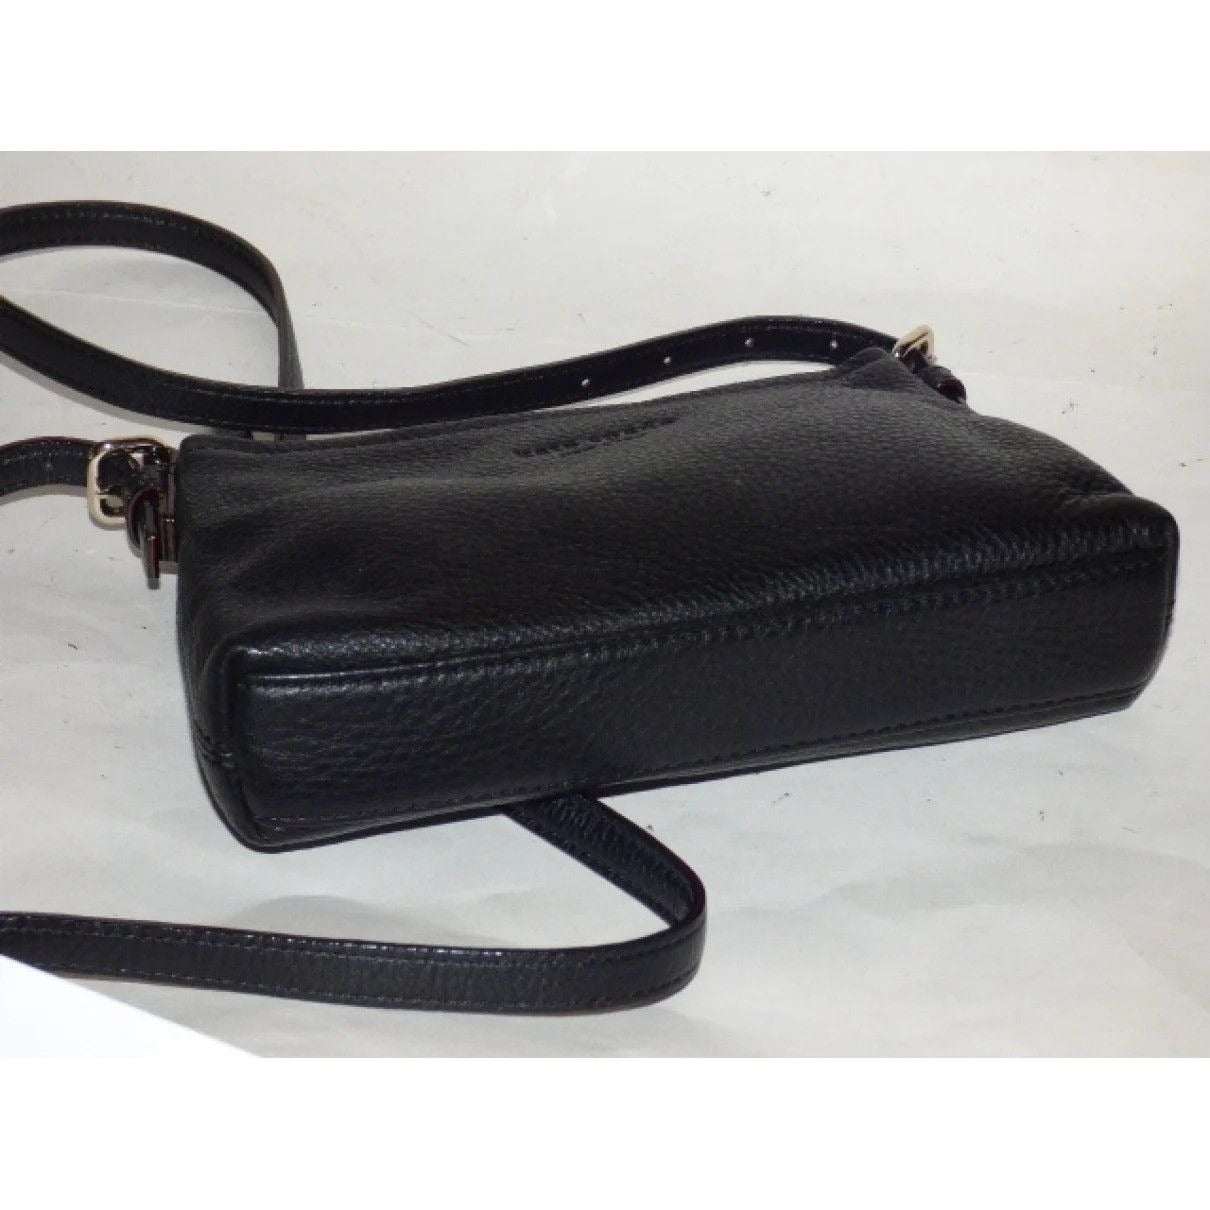 Kate Spade, classic, buttery soft black leather, rectangular, shoulder or cross body purse with top zip pocket and gold accents